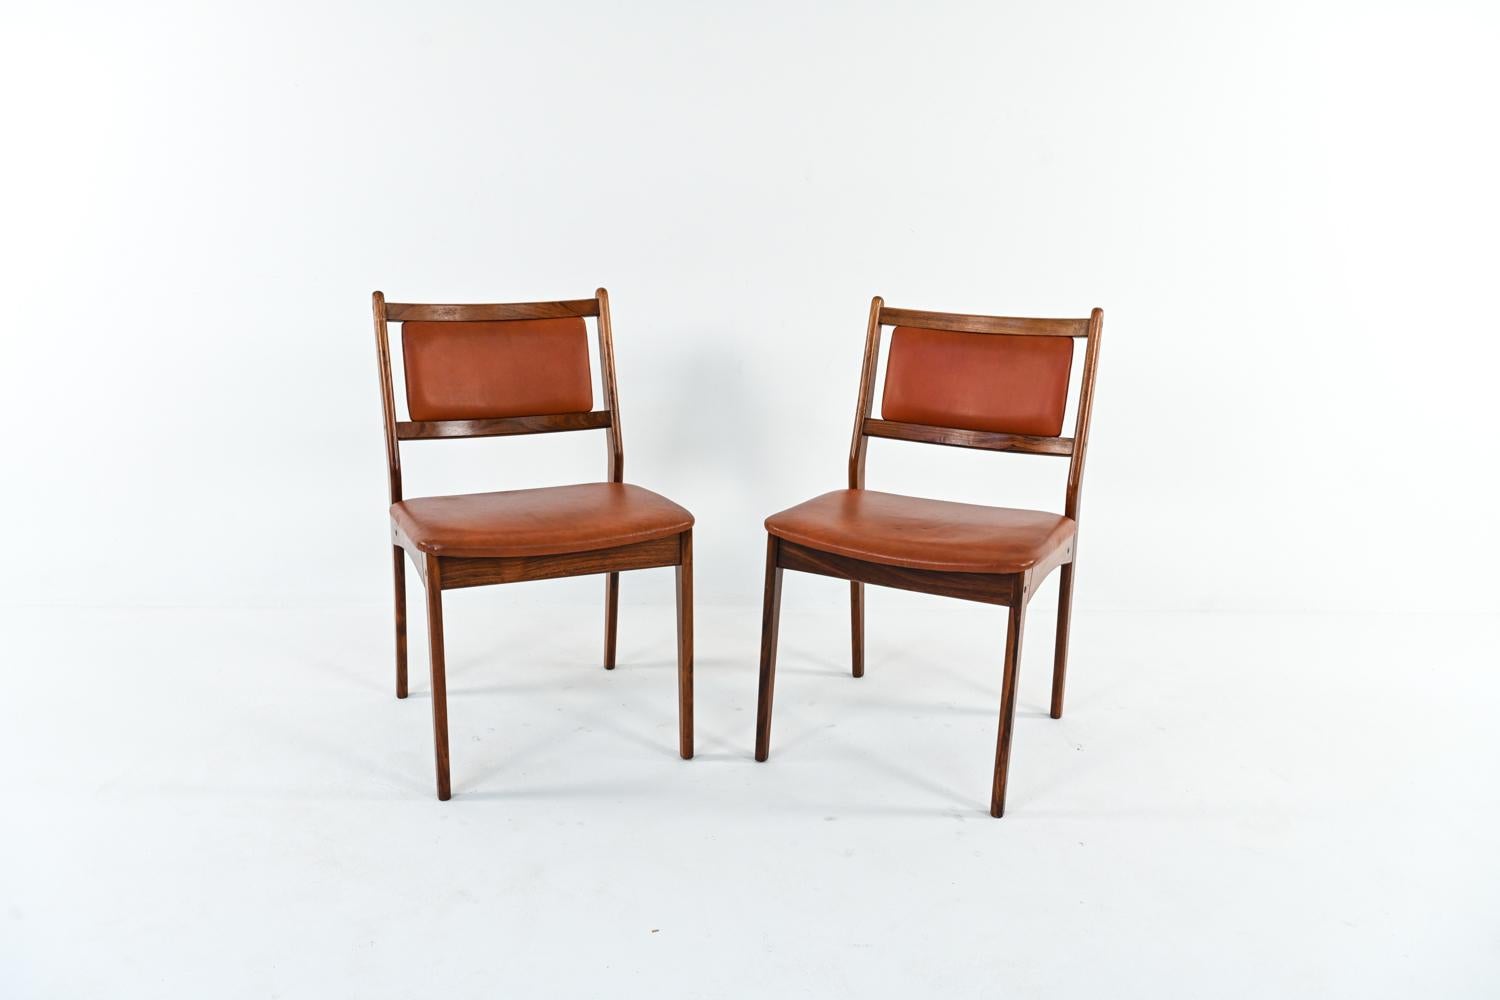 Leather (4) Spøttrup Rosewood Danish Mid-Century Dining Chairs, c. 1960's